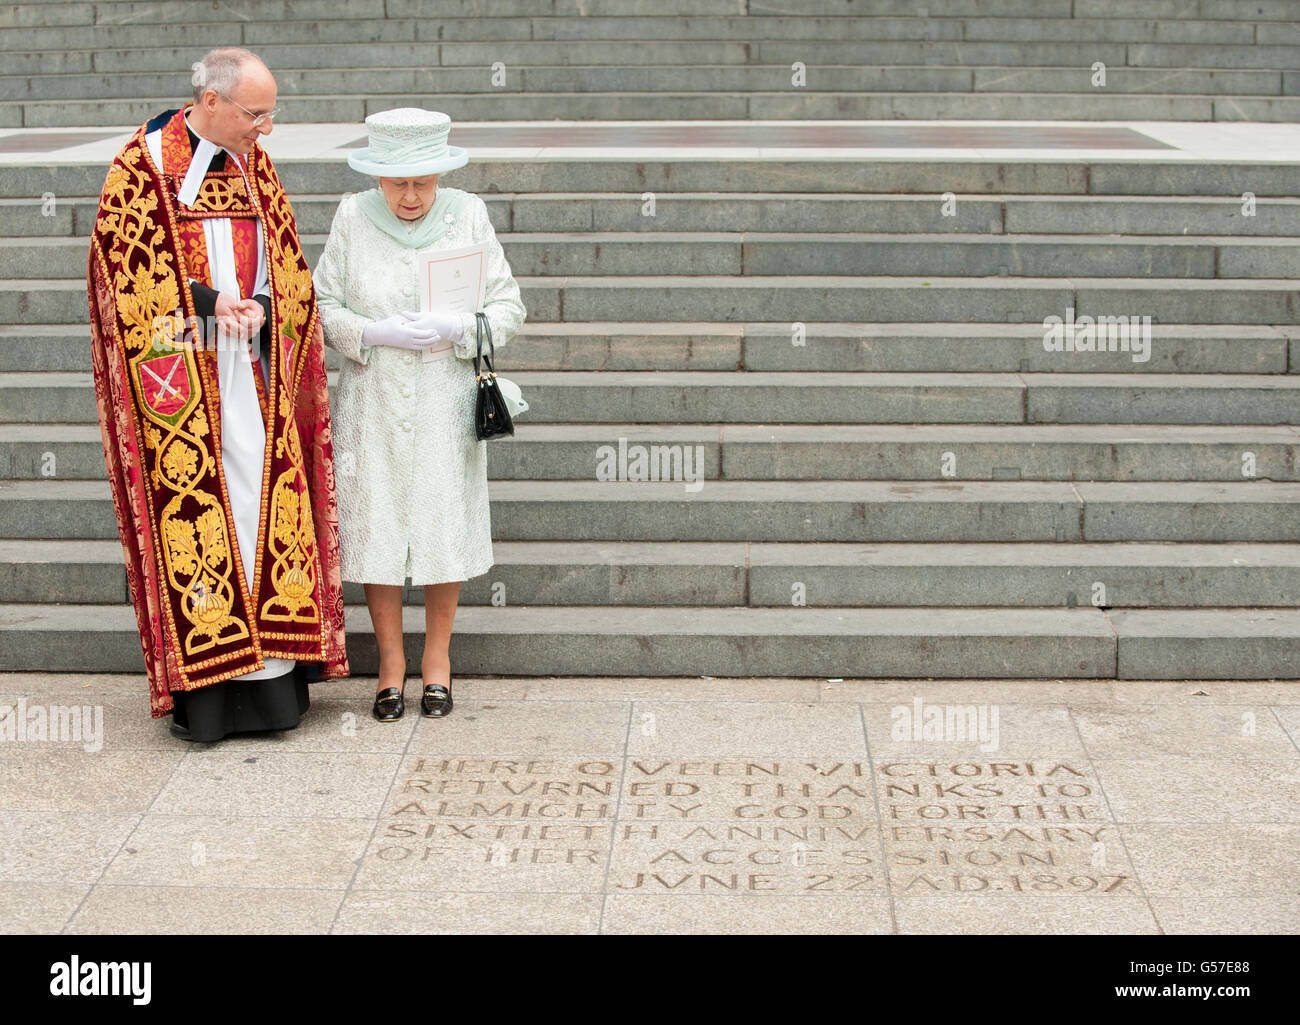 Queen Elizabeth II views an inscription at the foot of the steps of Saint Paul's Cathedral, in central London, alongside Dean of St Pauls, Dr David Ison, following a service of thanksgiving. Stock Photo